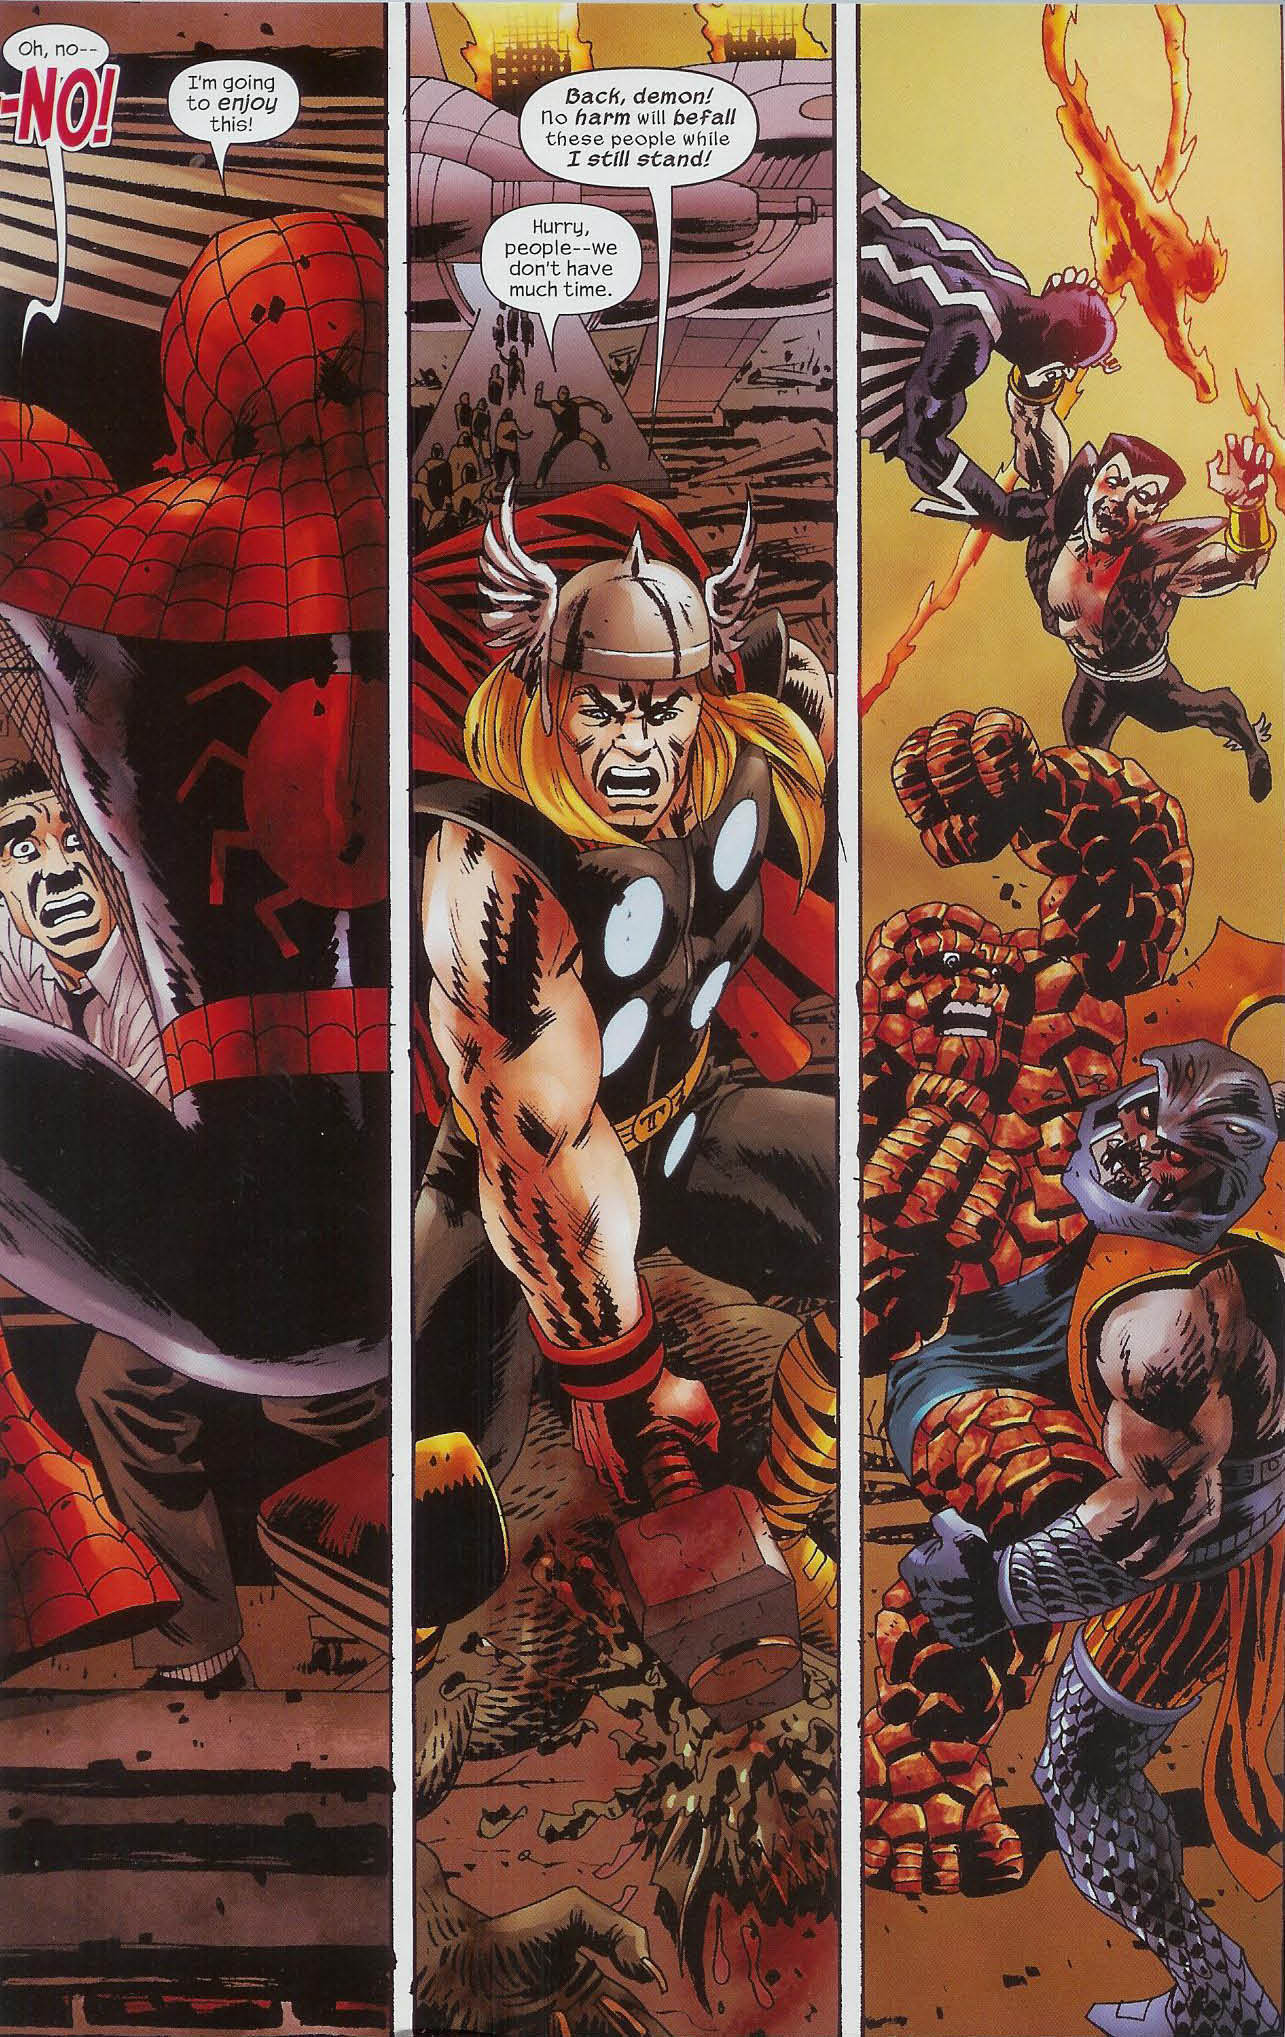 Marvel Zombies: Dead Days Pics, Comics Collection